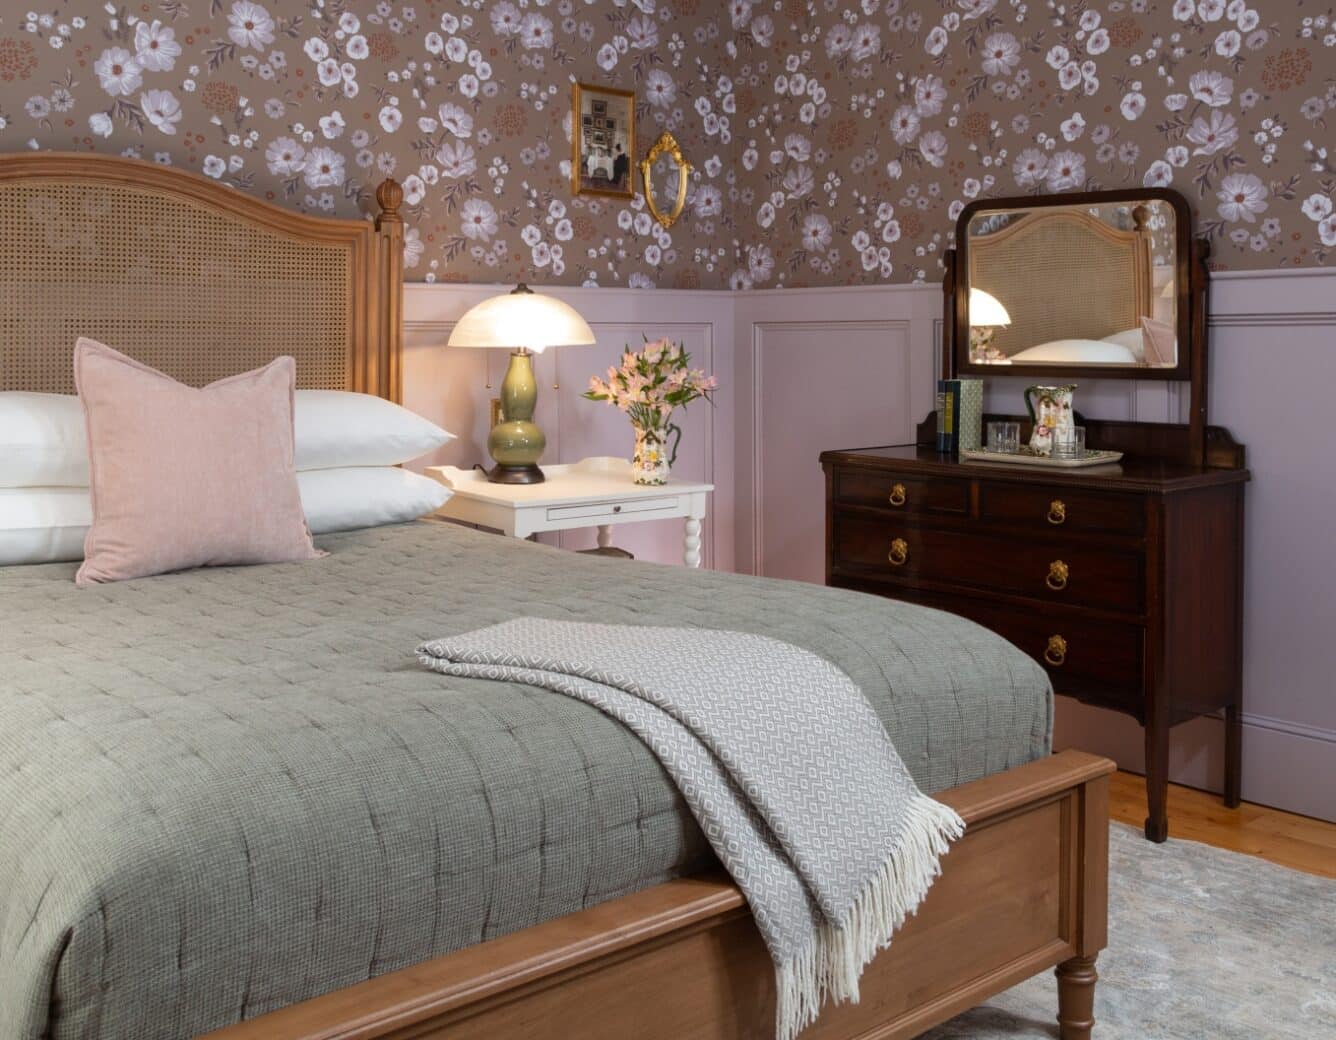 Bed in wallpapered room with antique dresser